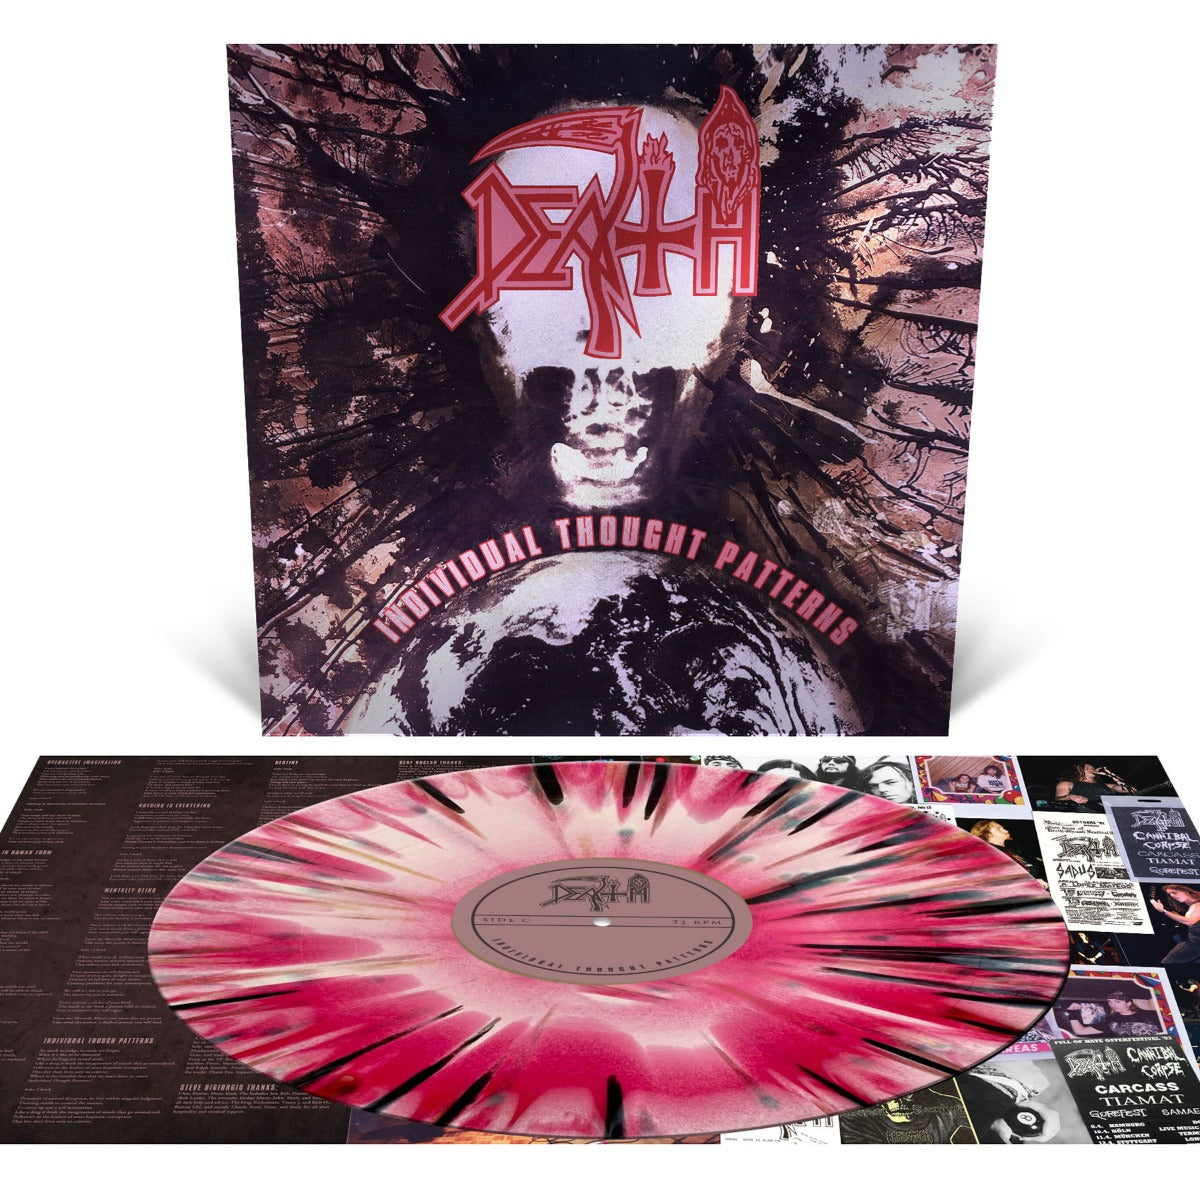 Death | Individual Thought Patterns (Colored Vinyl, Pink, White, Red, Reissue) | Vinyl - 0